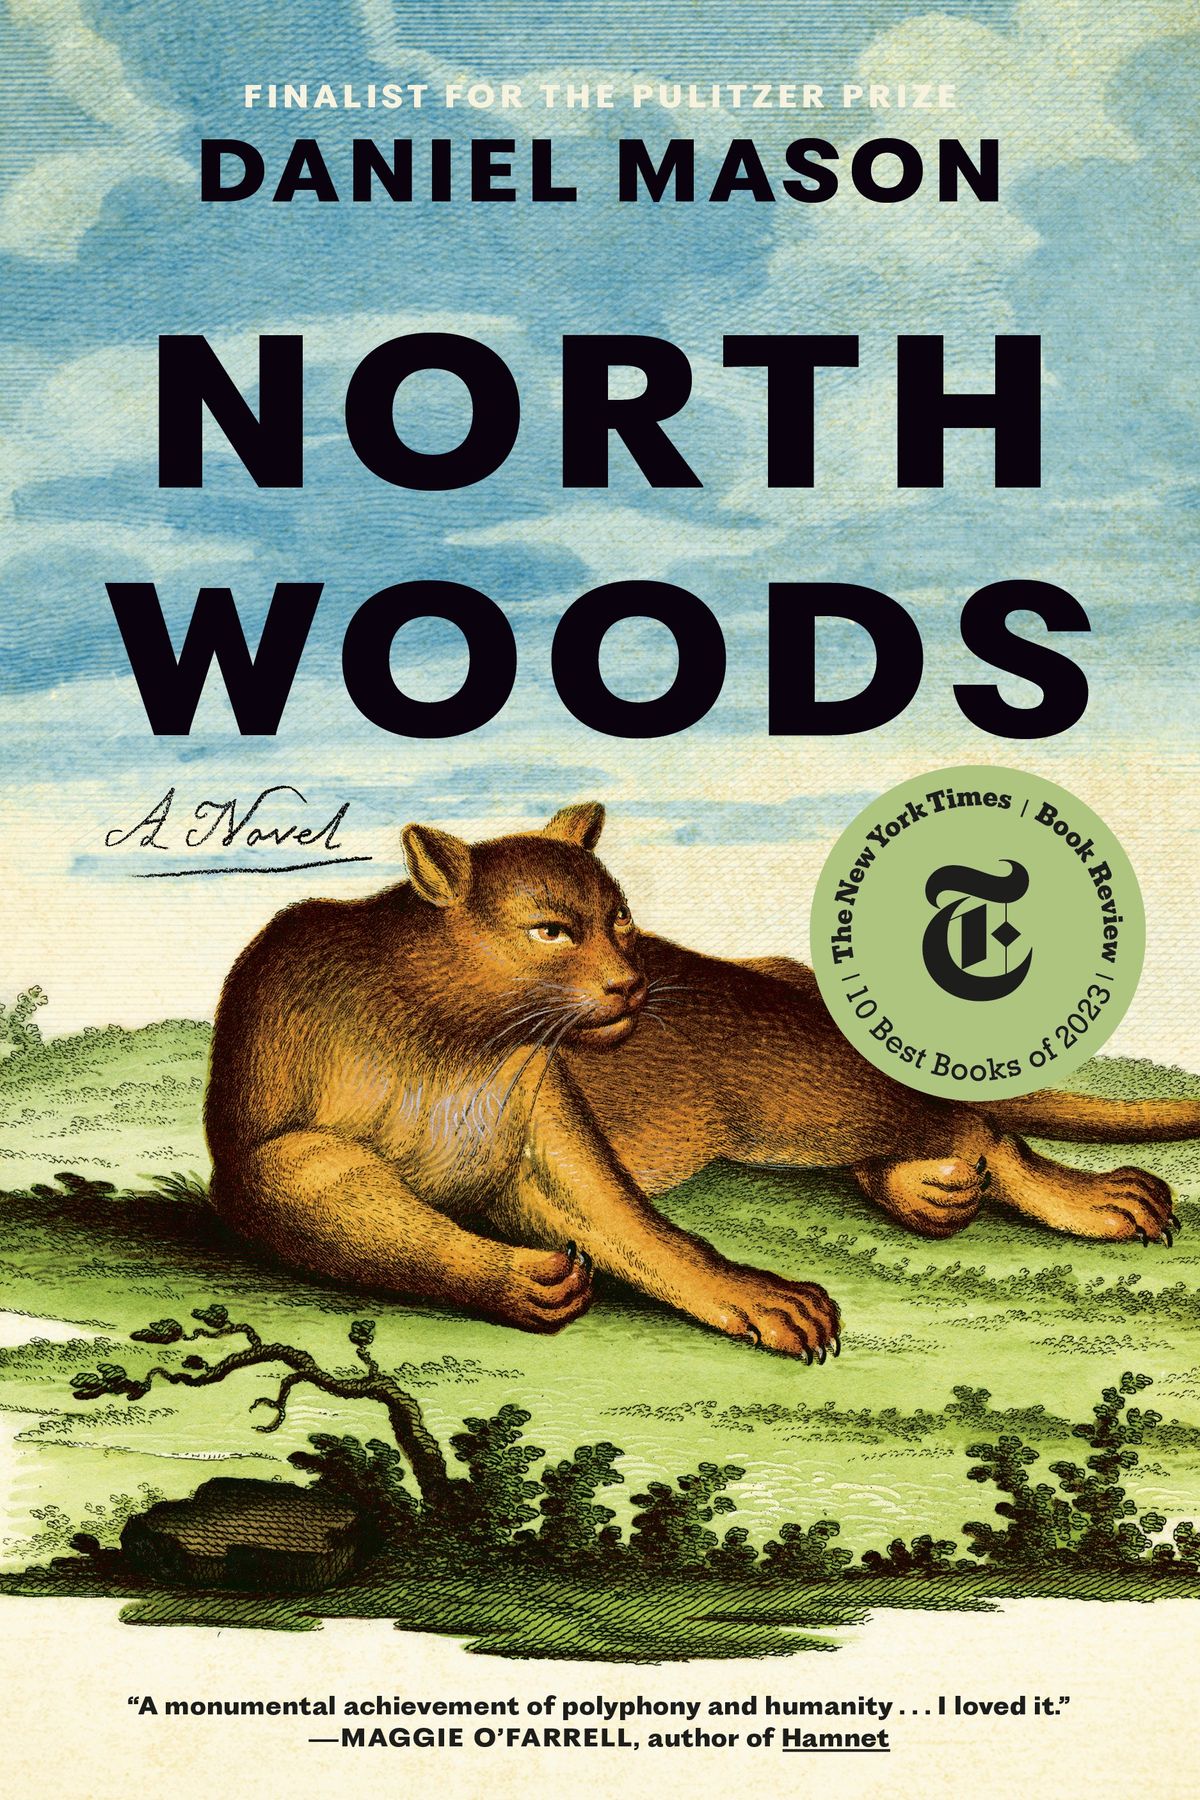 ‘North Woods’ takes readers to the wilderness